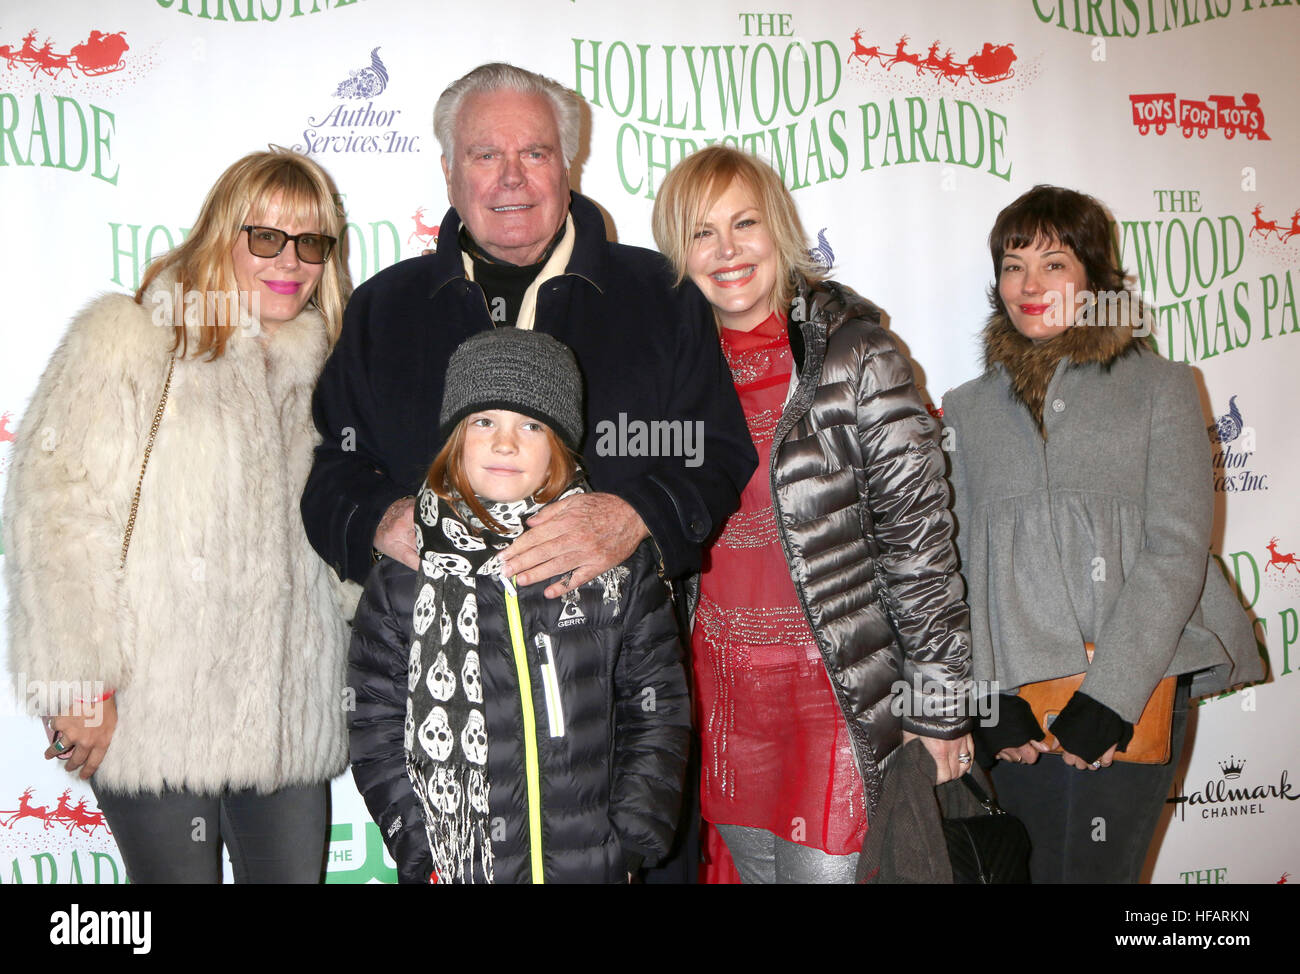 85. annual Hollywood Christmas Parade am Hollywood Boulevard mit: Courtney Brooke Wagner, Robert Wagner, Riley Wagner-Lewis, Katie Wagner, Natasha Gregson Wagner wo: Los Angeles, California, Vereinigte Staaten von Amerika bei: 27. November 2016 Stockfoto